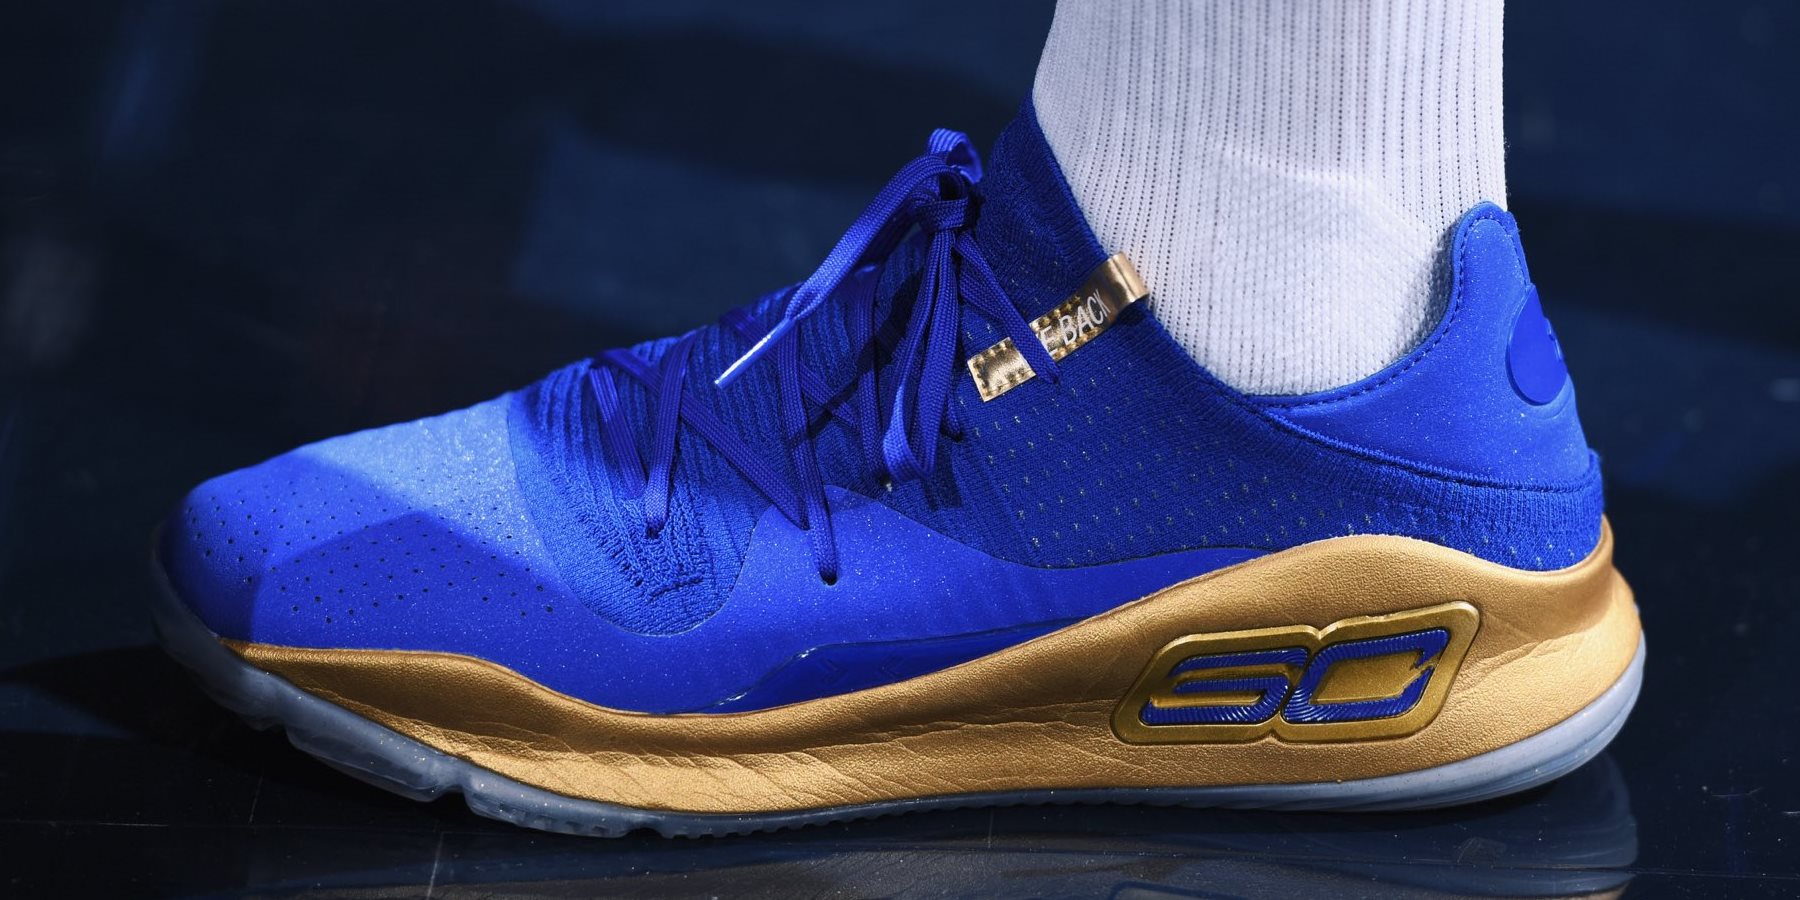 Under Armour Curry 4 Low 